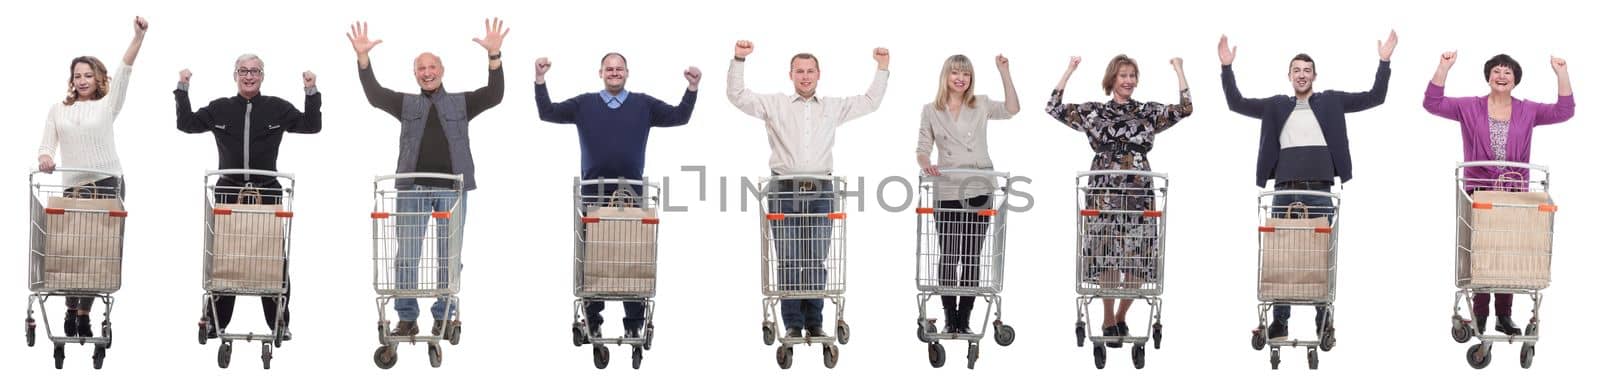 group of people with cart raised their hands up isolated on white background